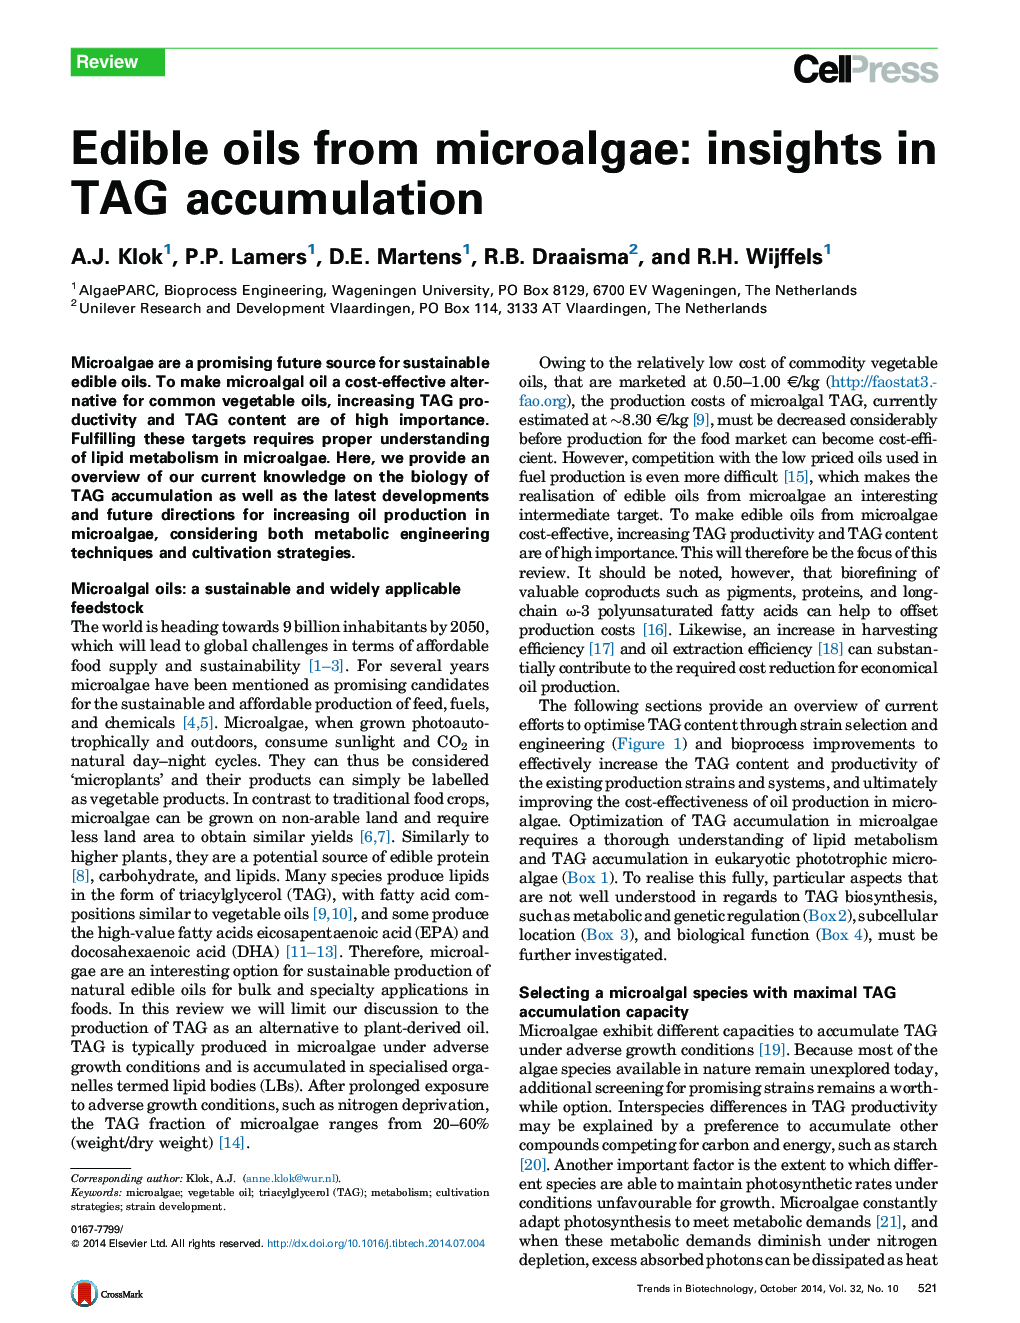 Edible oils from microalgae: insights in TAG accumulation